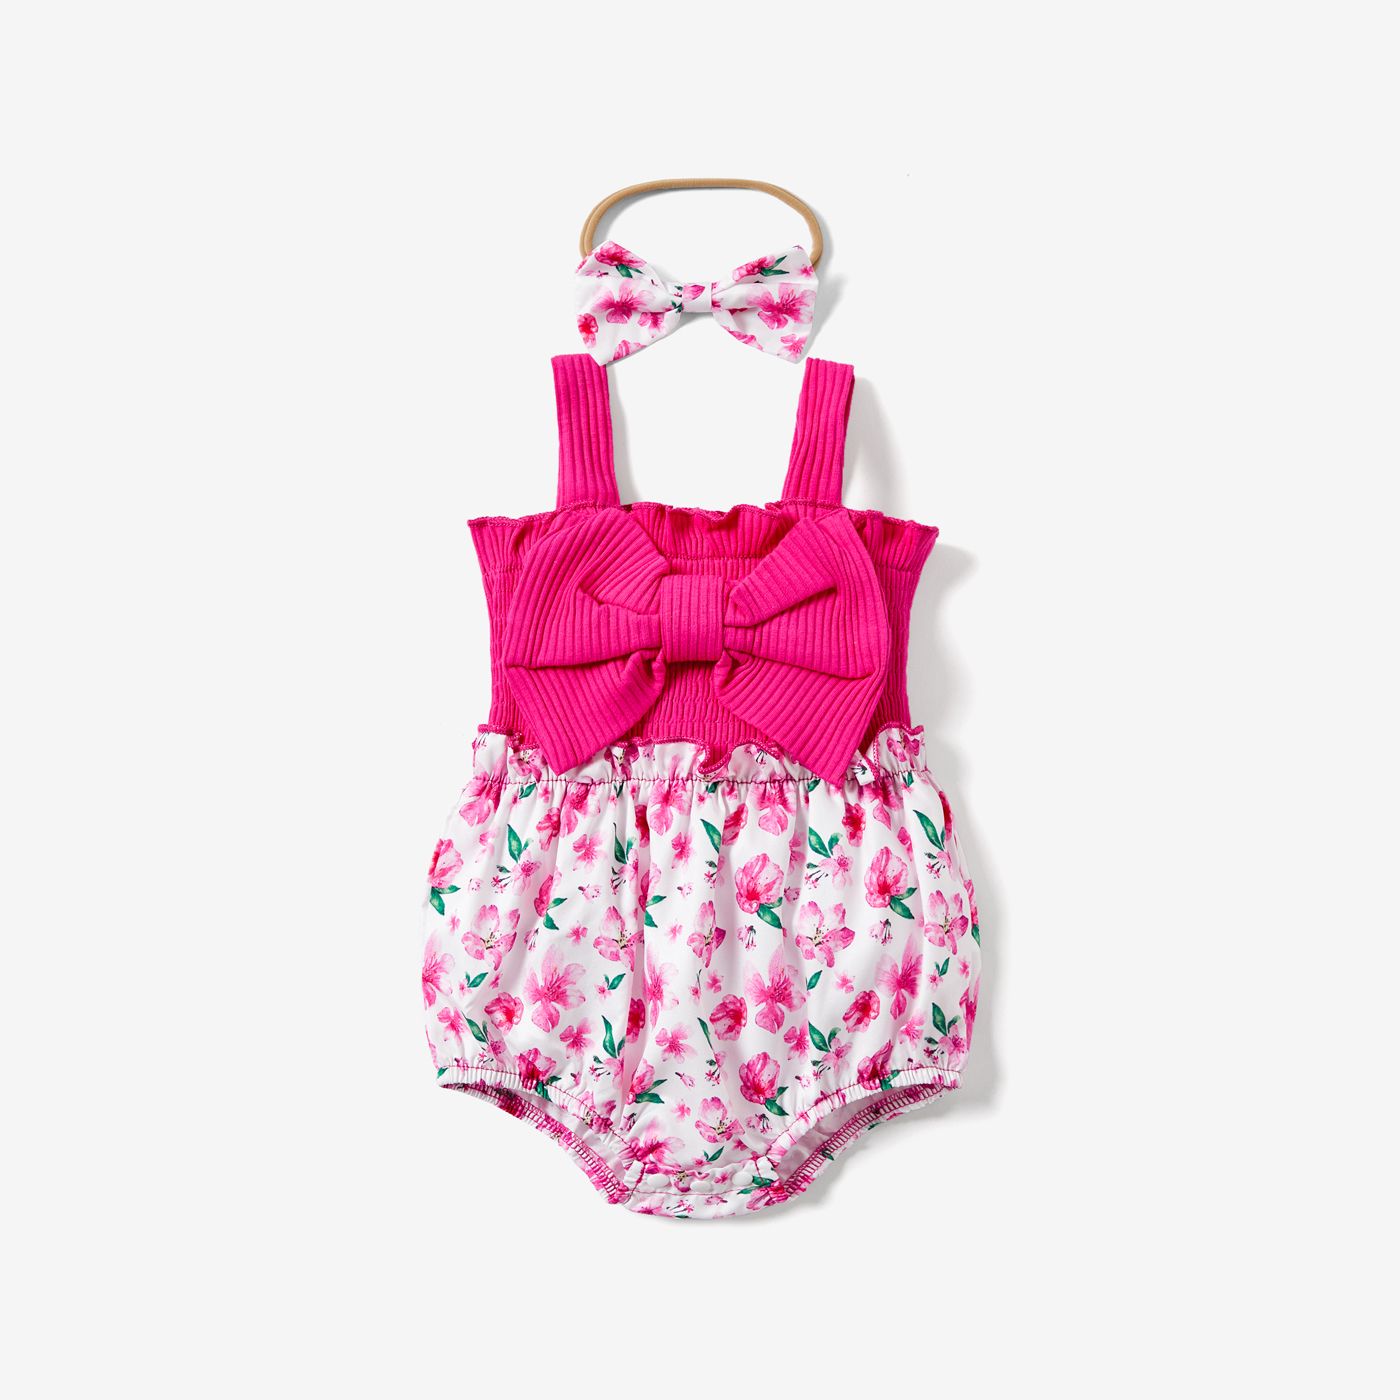 2pcs Baby Girl 95% Cotton Ribbed Bowknot Splicing Floral Print Sleeveless Romper With Headband Set